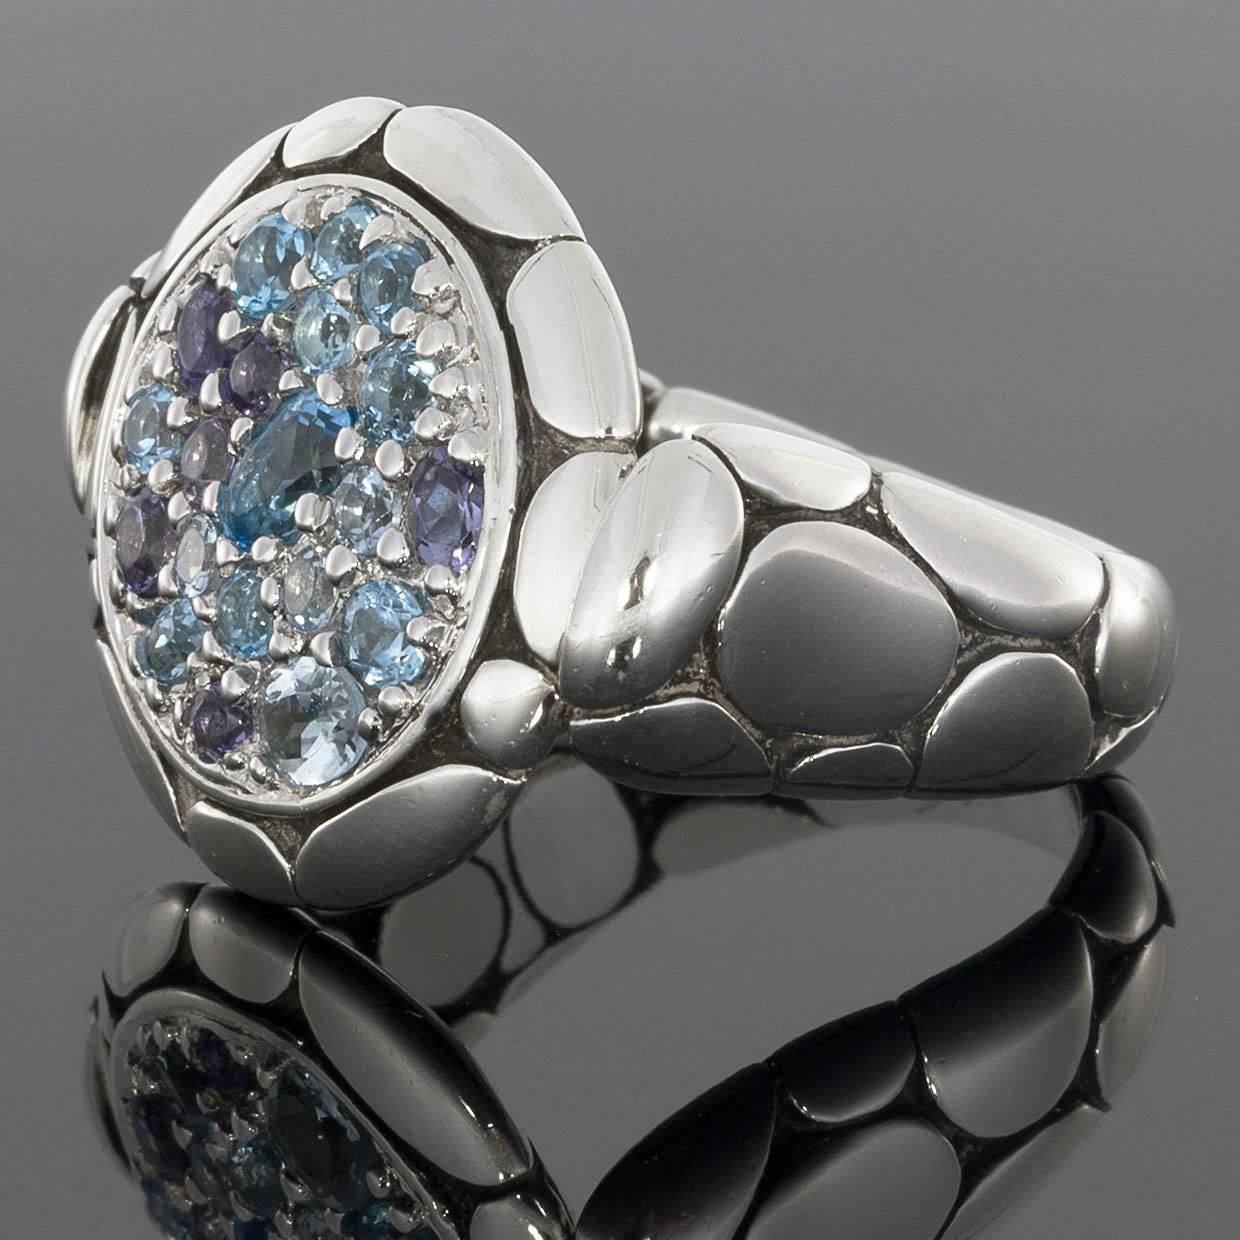 Each piece of John Hardy jewelry has been crafted in Bali since 1975. John Hardy is dedicated to creating timeless one-of-a-kind pieces that are brilliantly alive.

This beautiful & fun ring is from John Hardy's Kali collection. It is called the